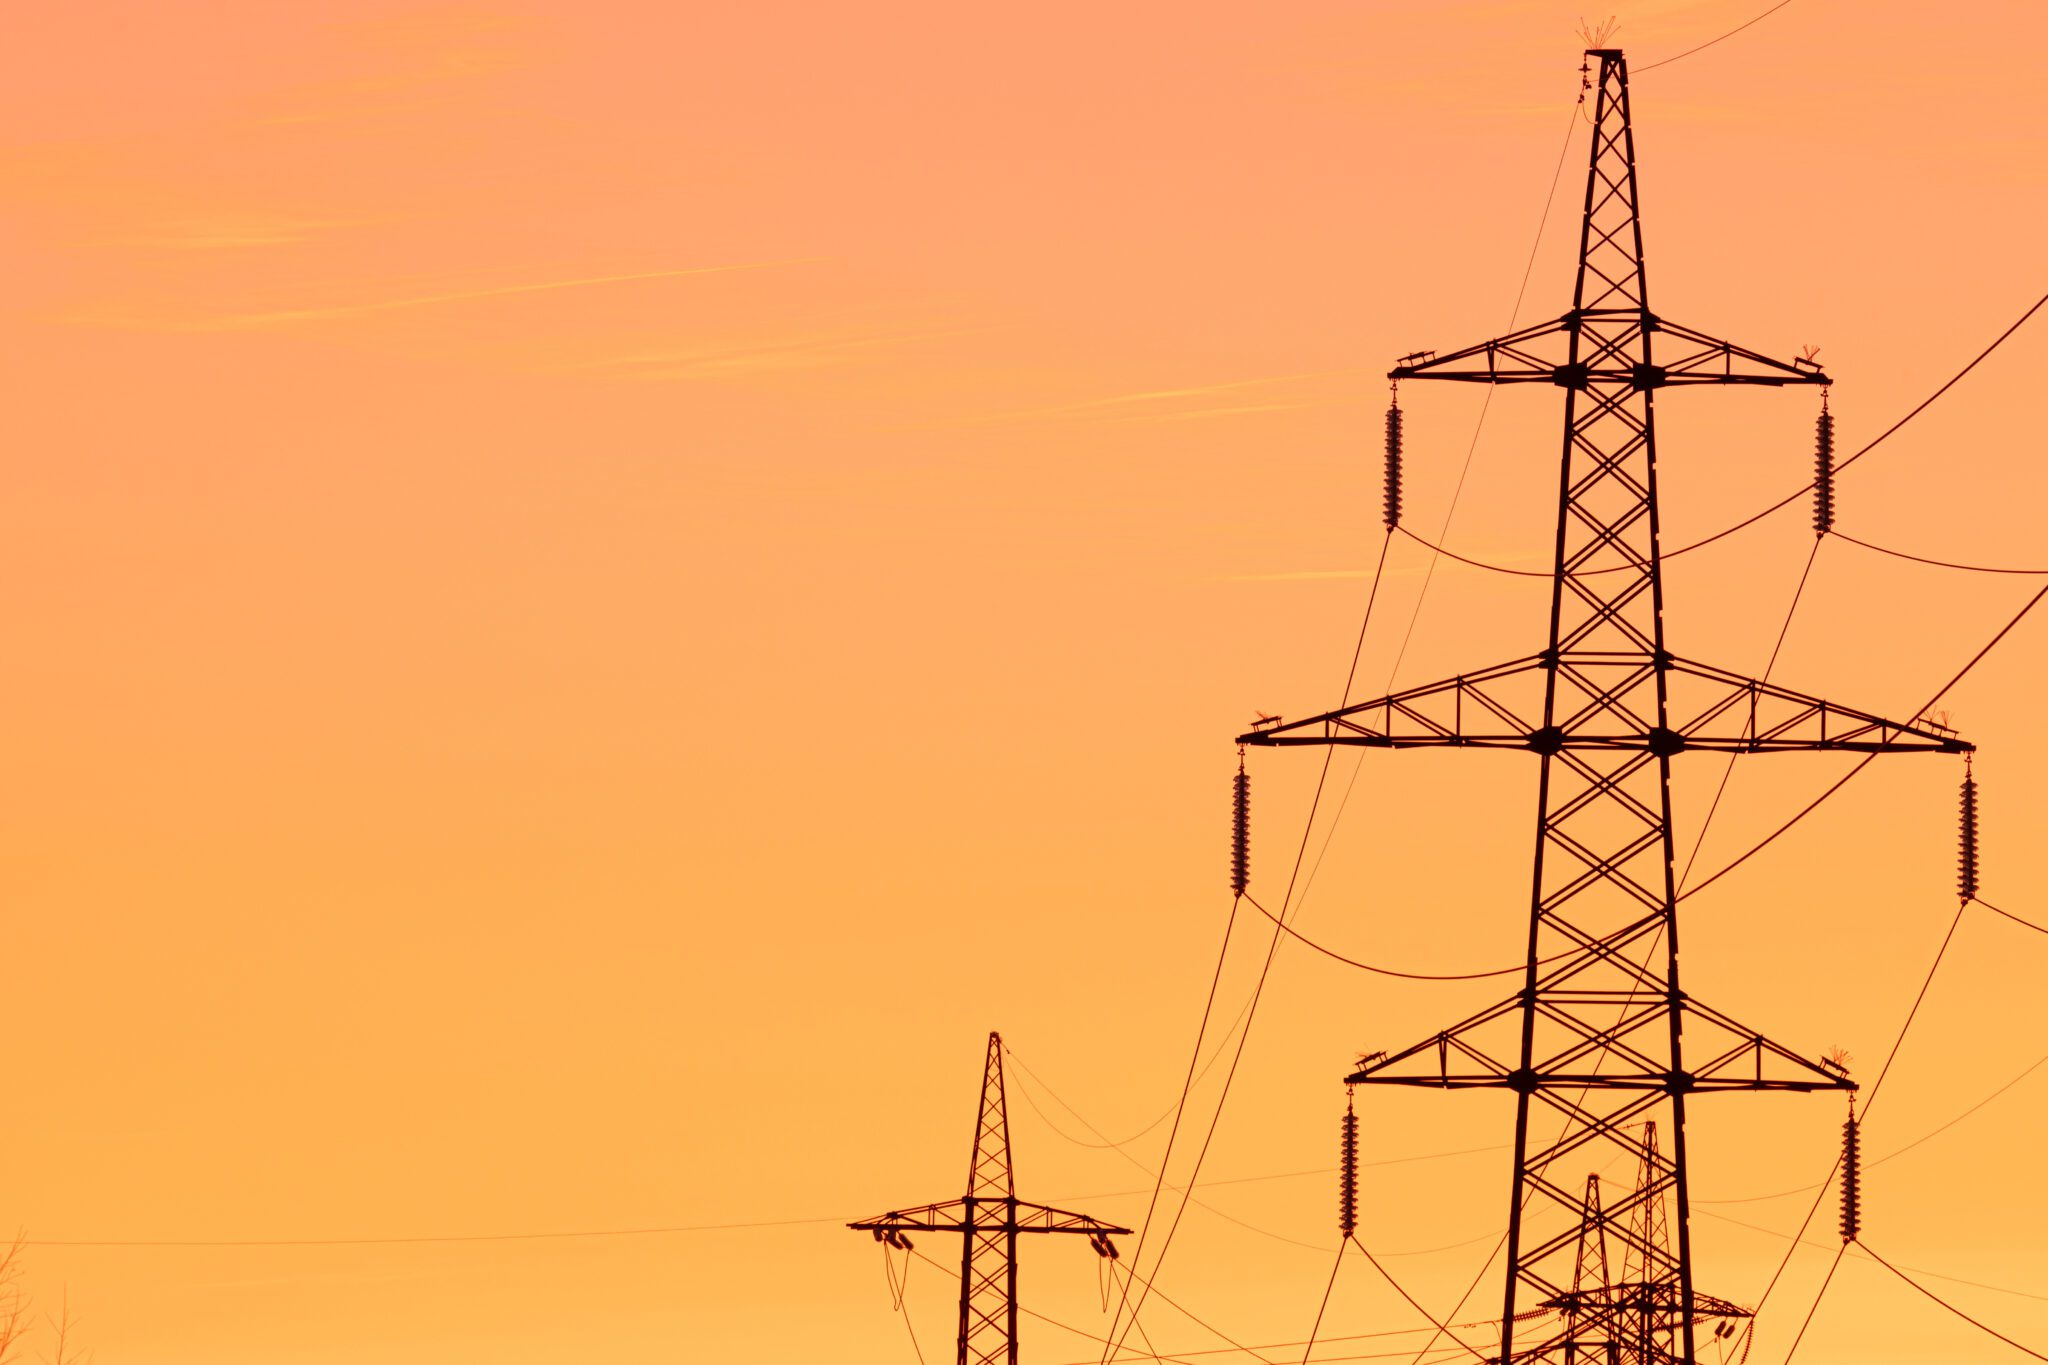 Transmission lines with an orange sky background